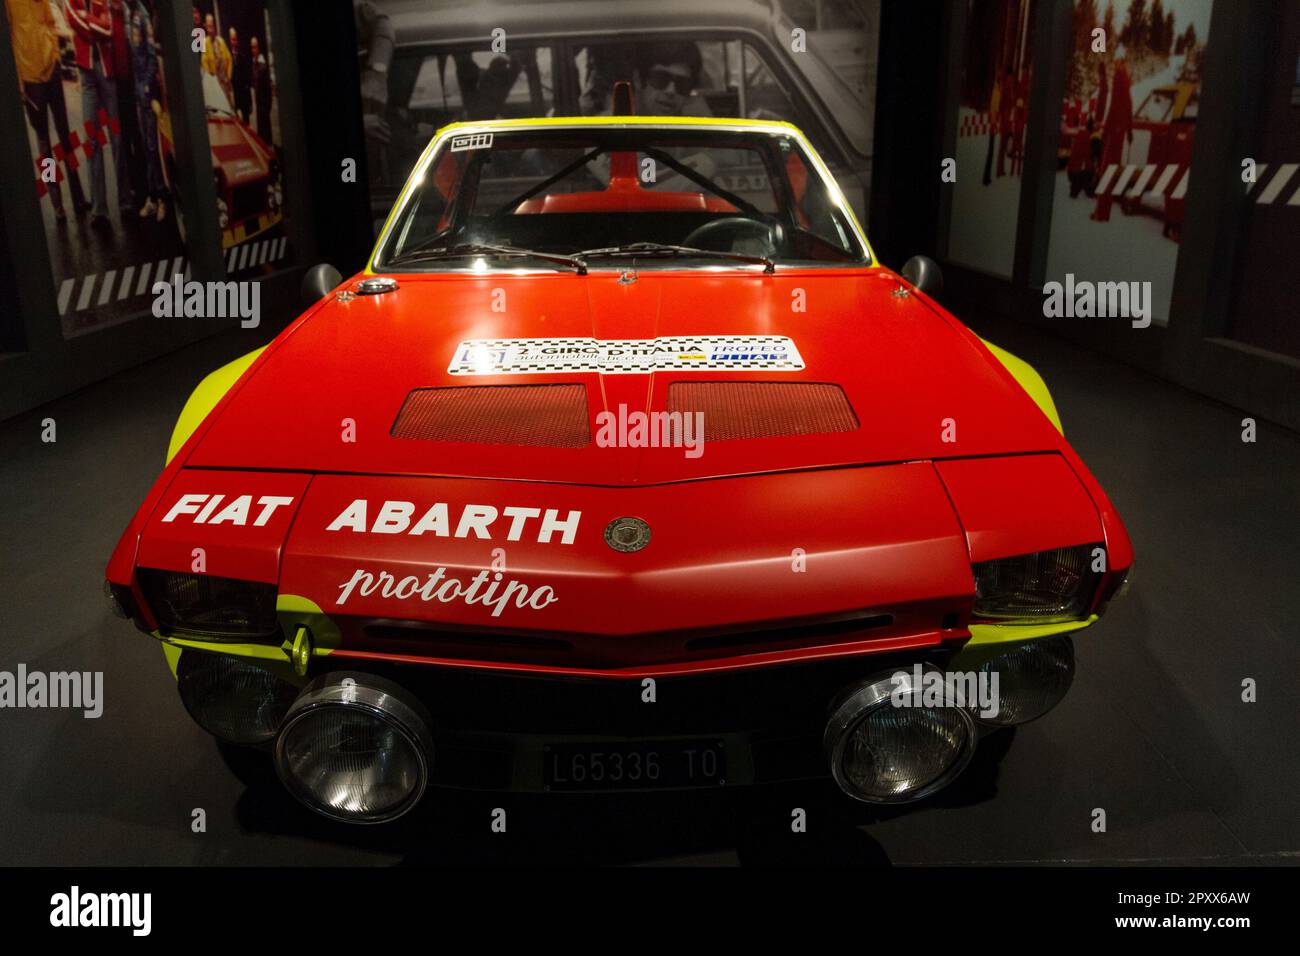 FIAT X1/9 Abarth Prototipo (1974). Exhibition of old rally cars 'Golden age of Rally' at MAUTO, Museo dell'Automobile of Turin, Italy. Stock Photo